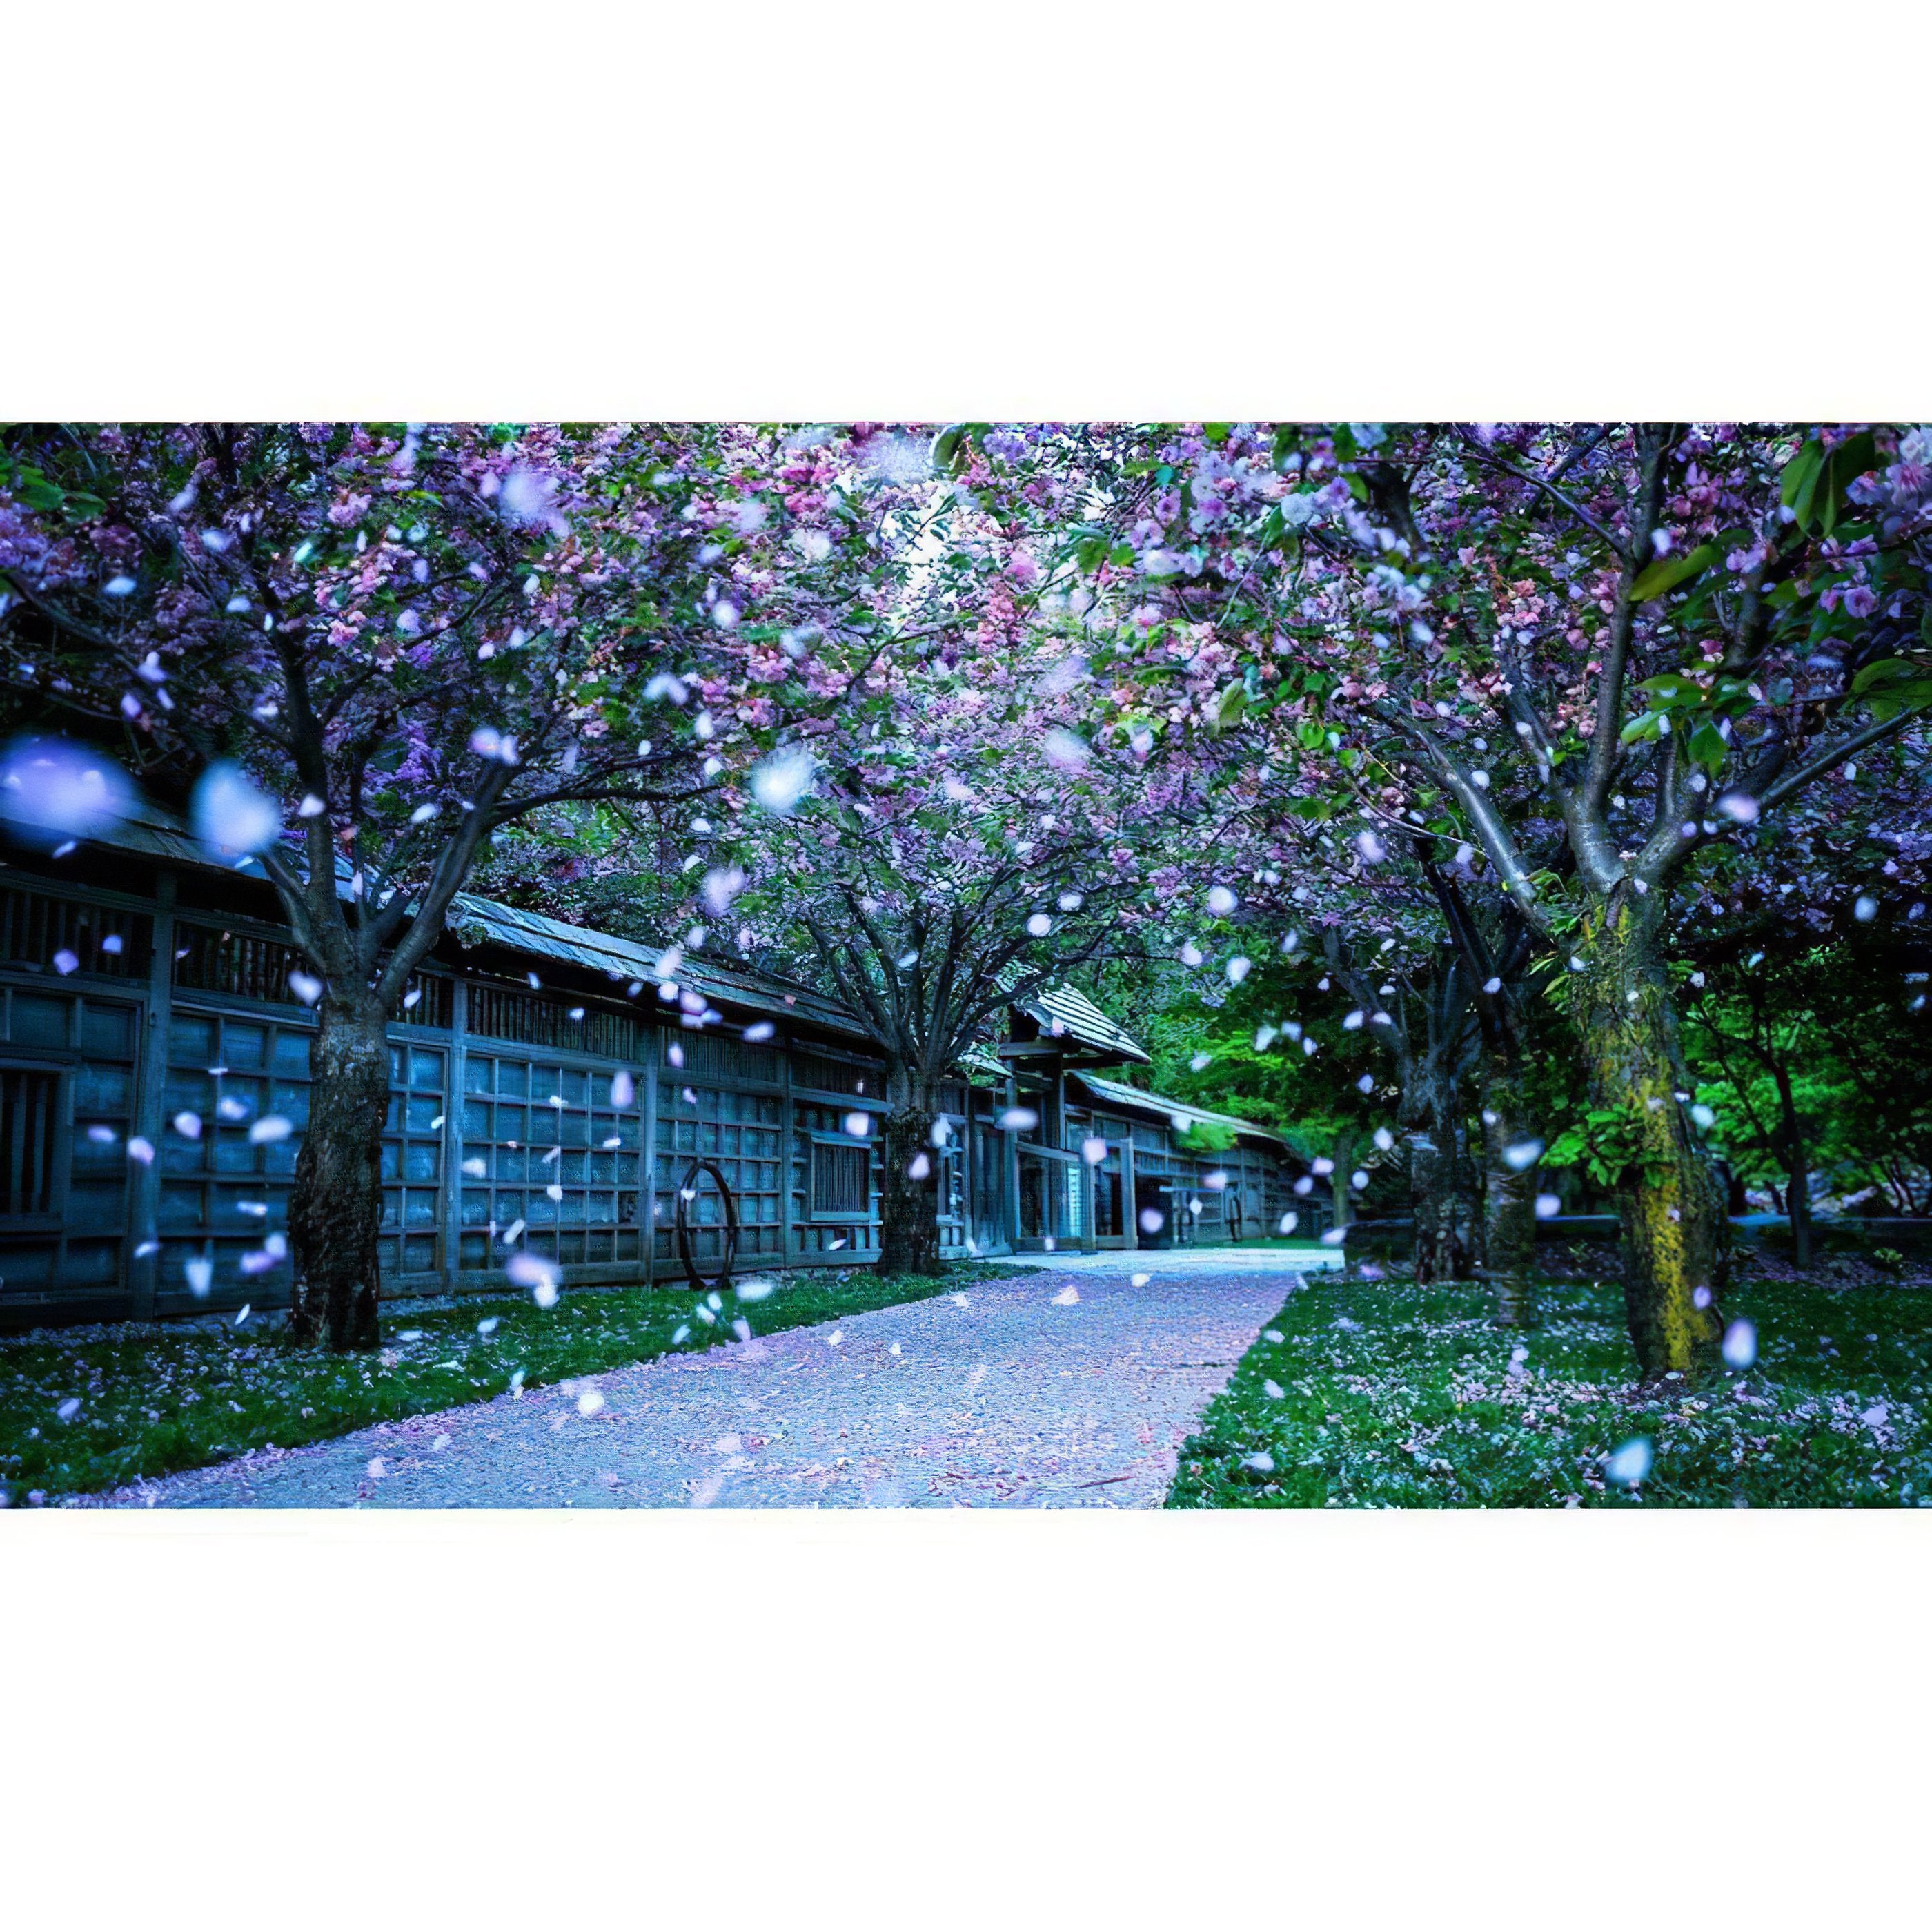 Stroll down a path lined with blooming blossoms, embodying spring’s vibrant spirit.Road Of Cherry Trees - Diamondartlove